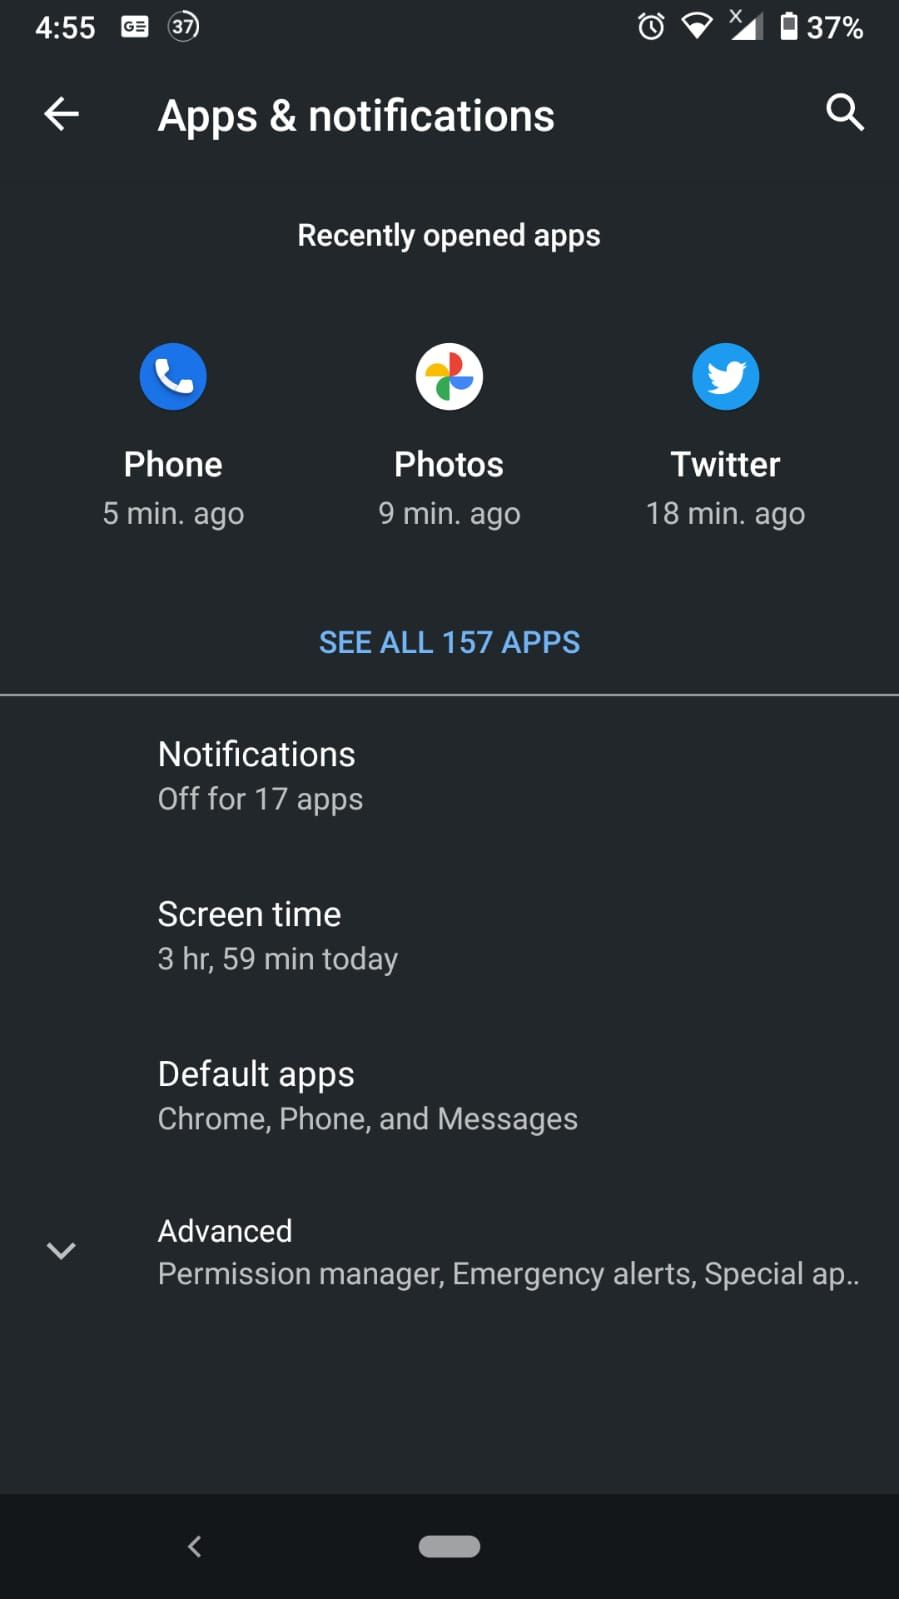 Apps & notifications settings on Android